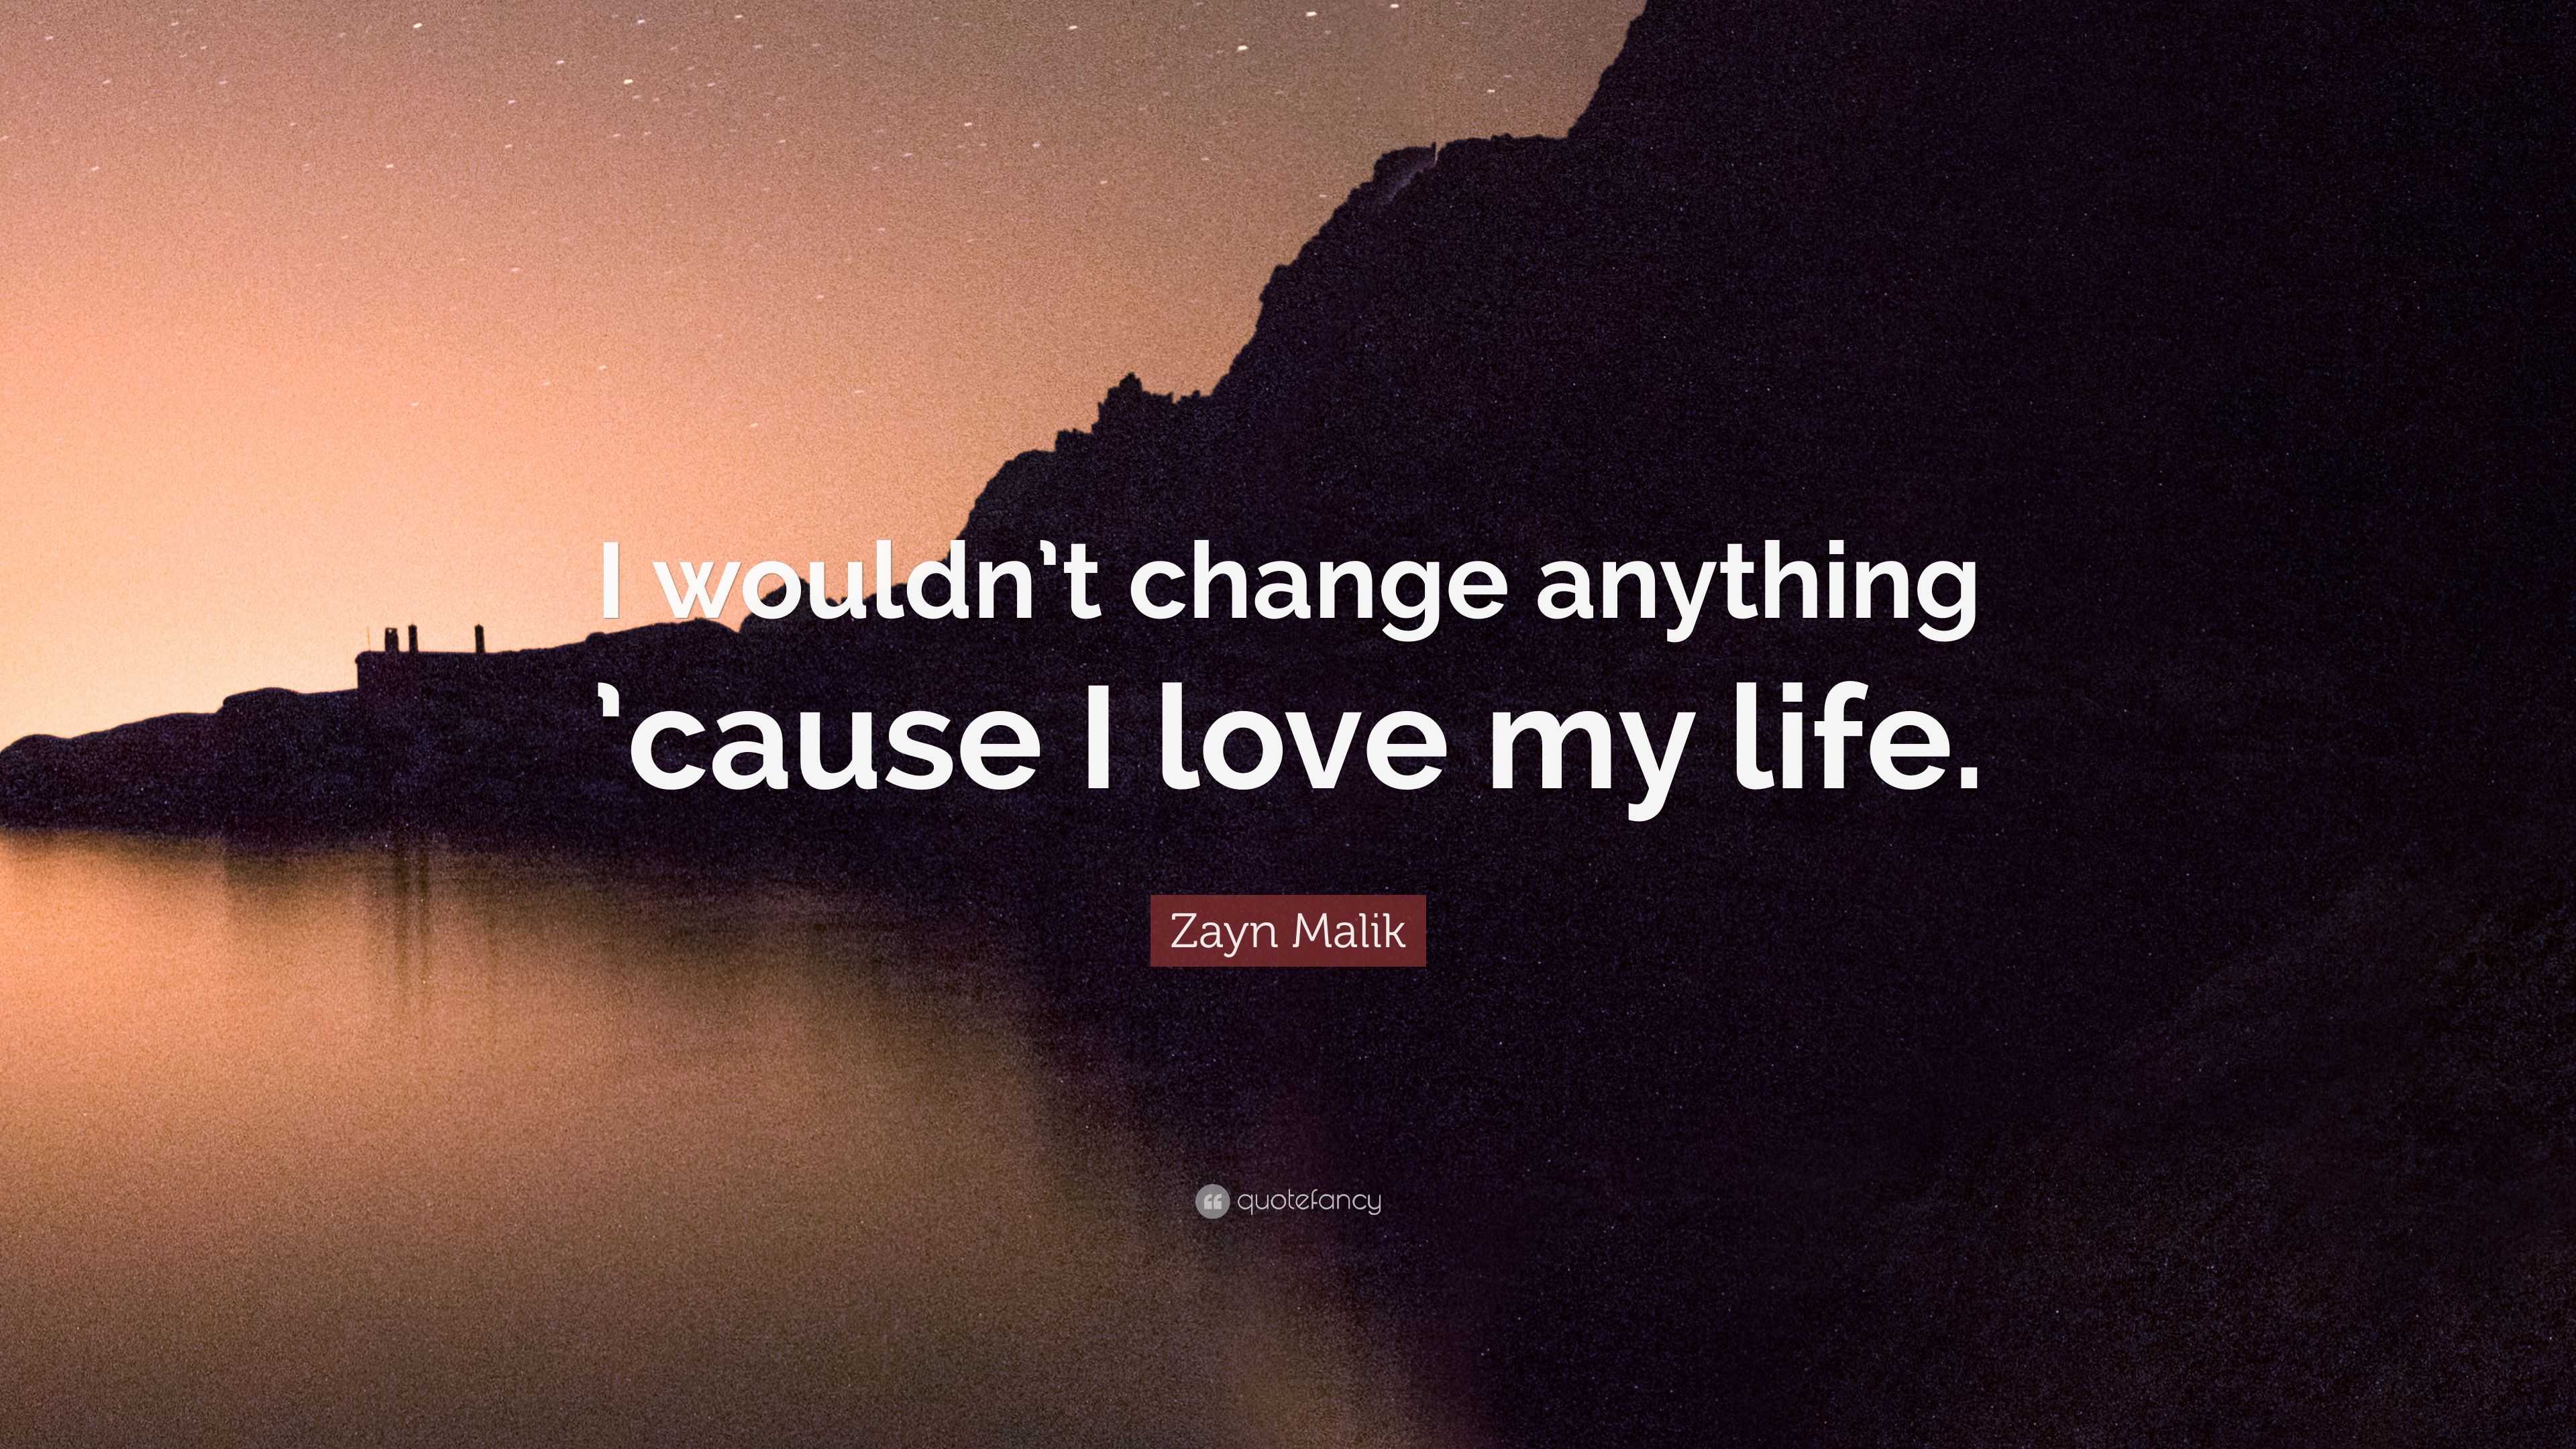 Zayn Malik Quote “I wouldn t change anything cause I love my